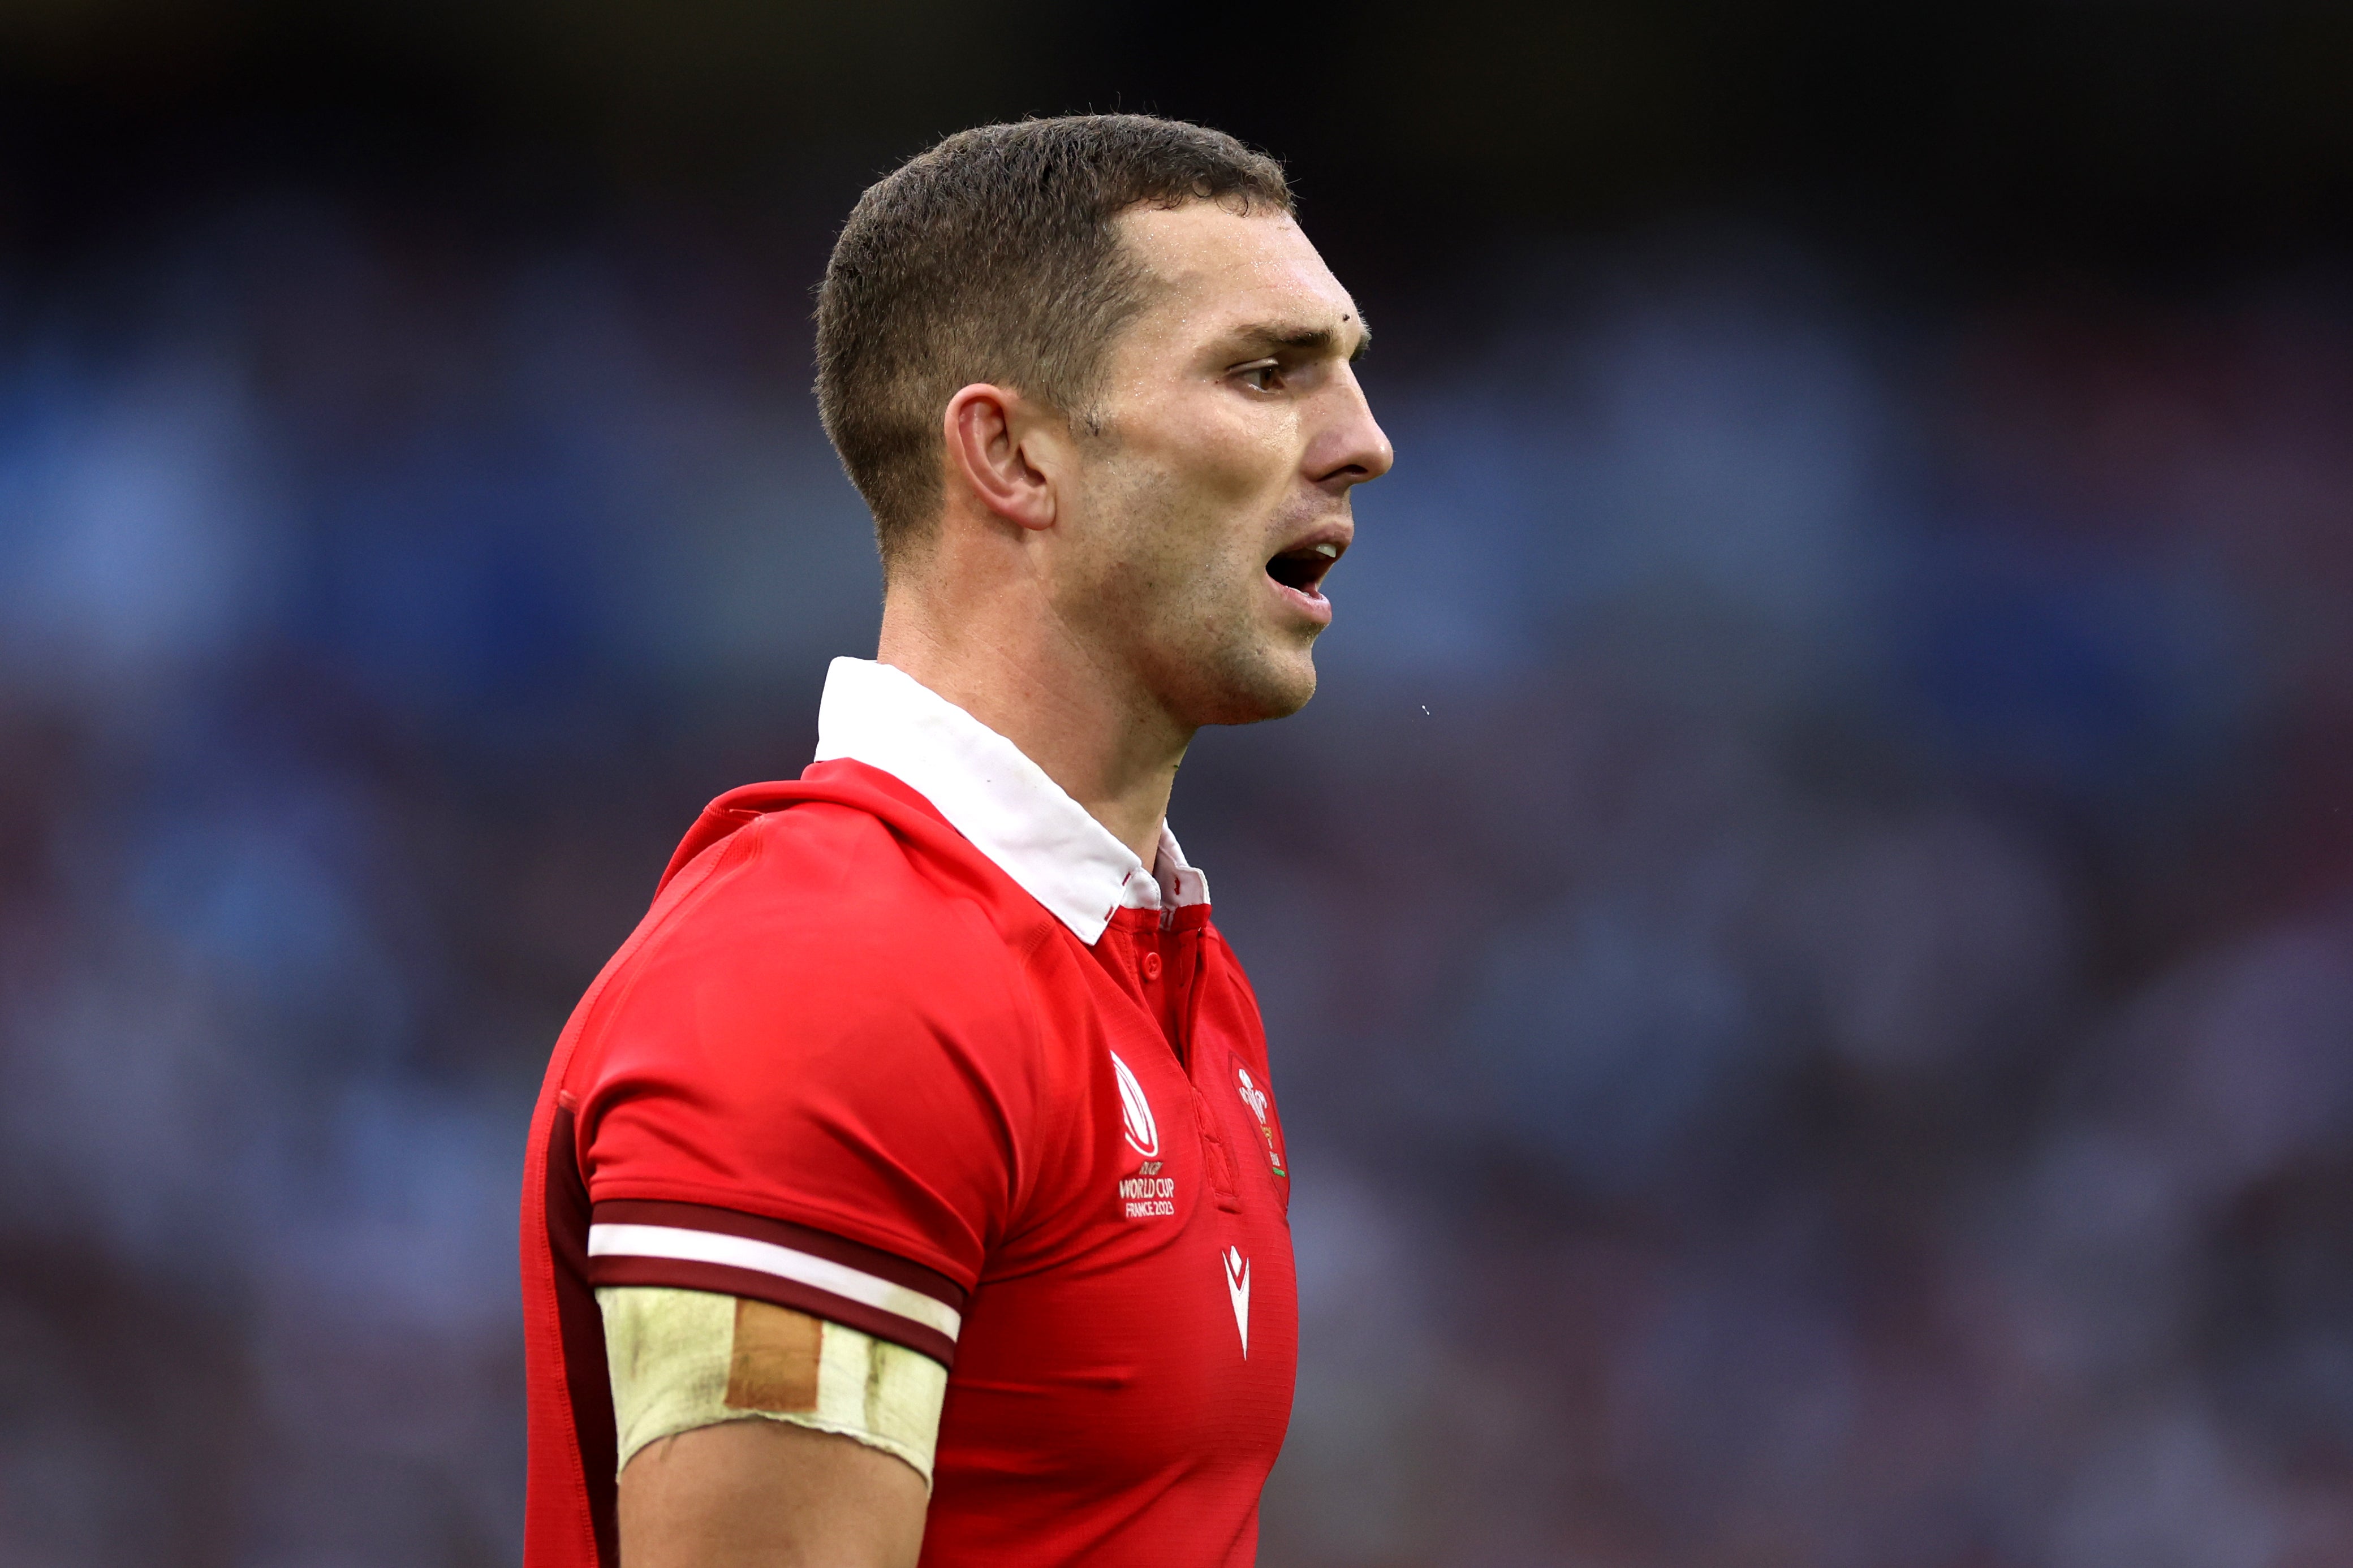 George North reveals he was briefly tempted by a move away from Rugby Union